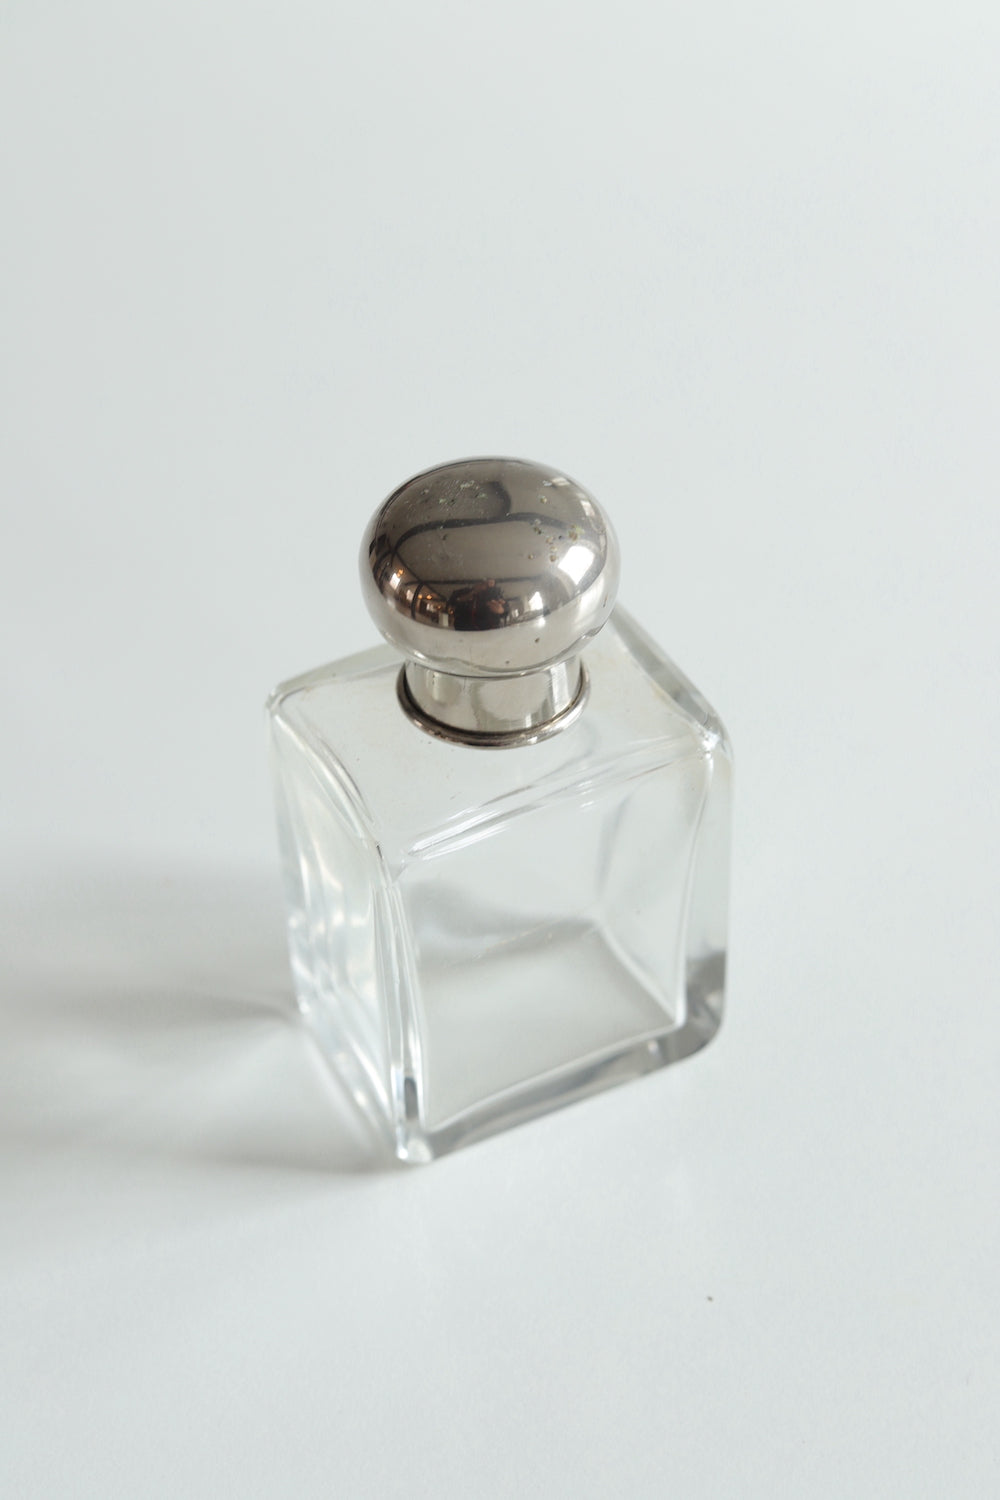 Vintage perfume bottle with original glass stopper and silver screw cap